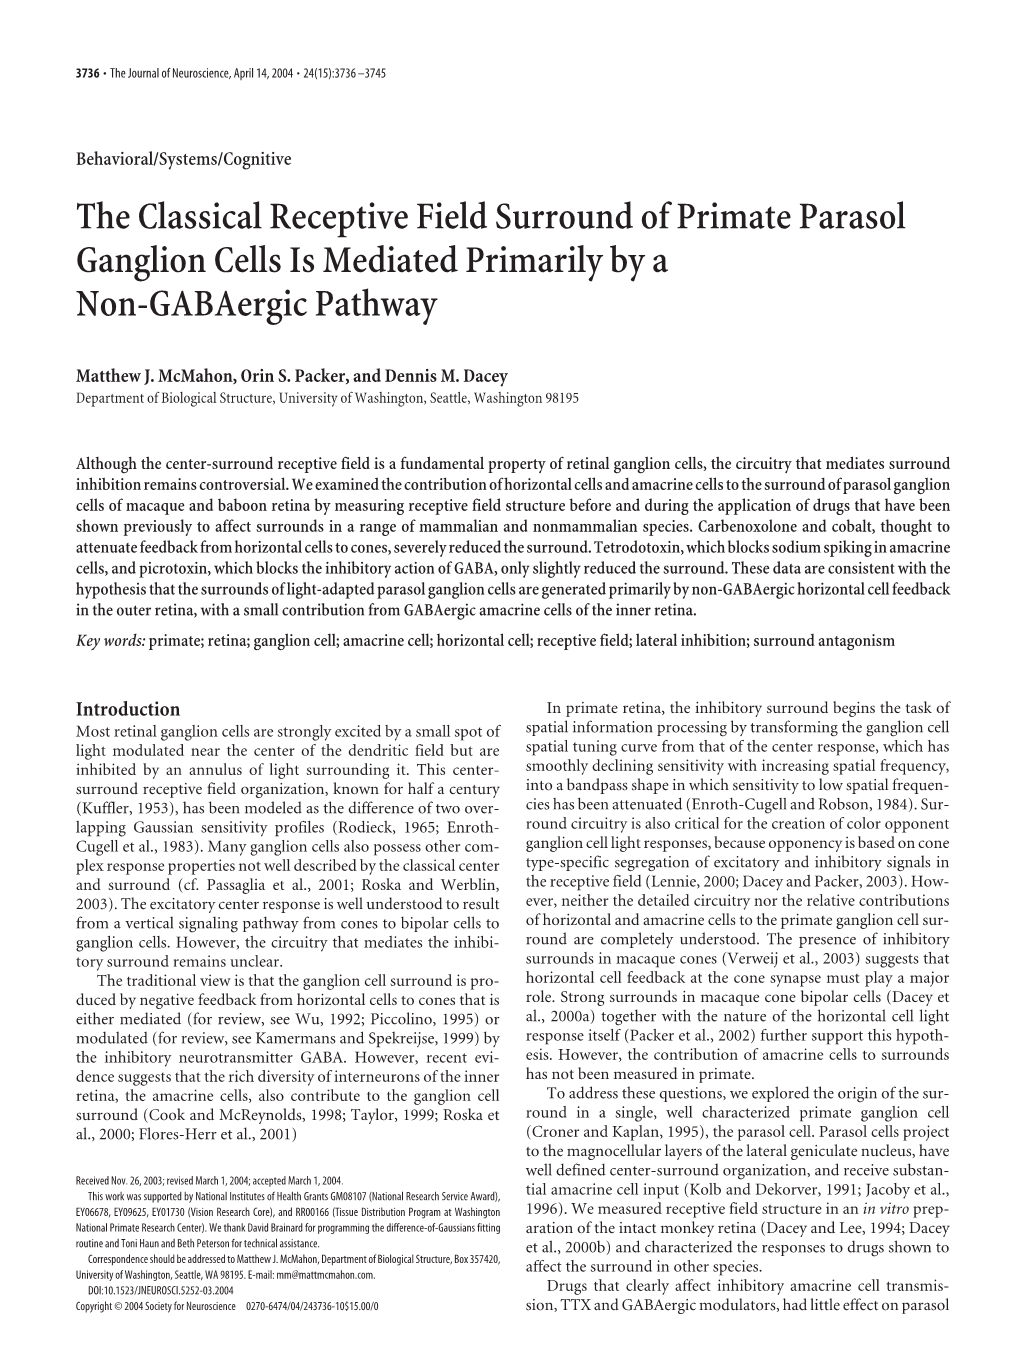 The Classical Receptive Field Surround of Primate Parasol Ganglion Cells Is Mediated Primarily by a Non-Gabaergic Pathway